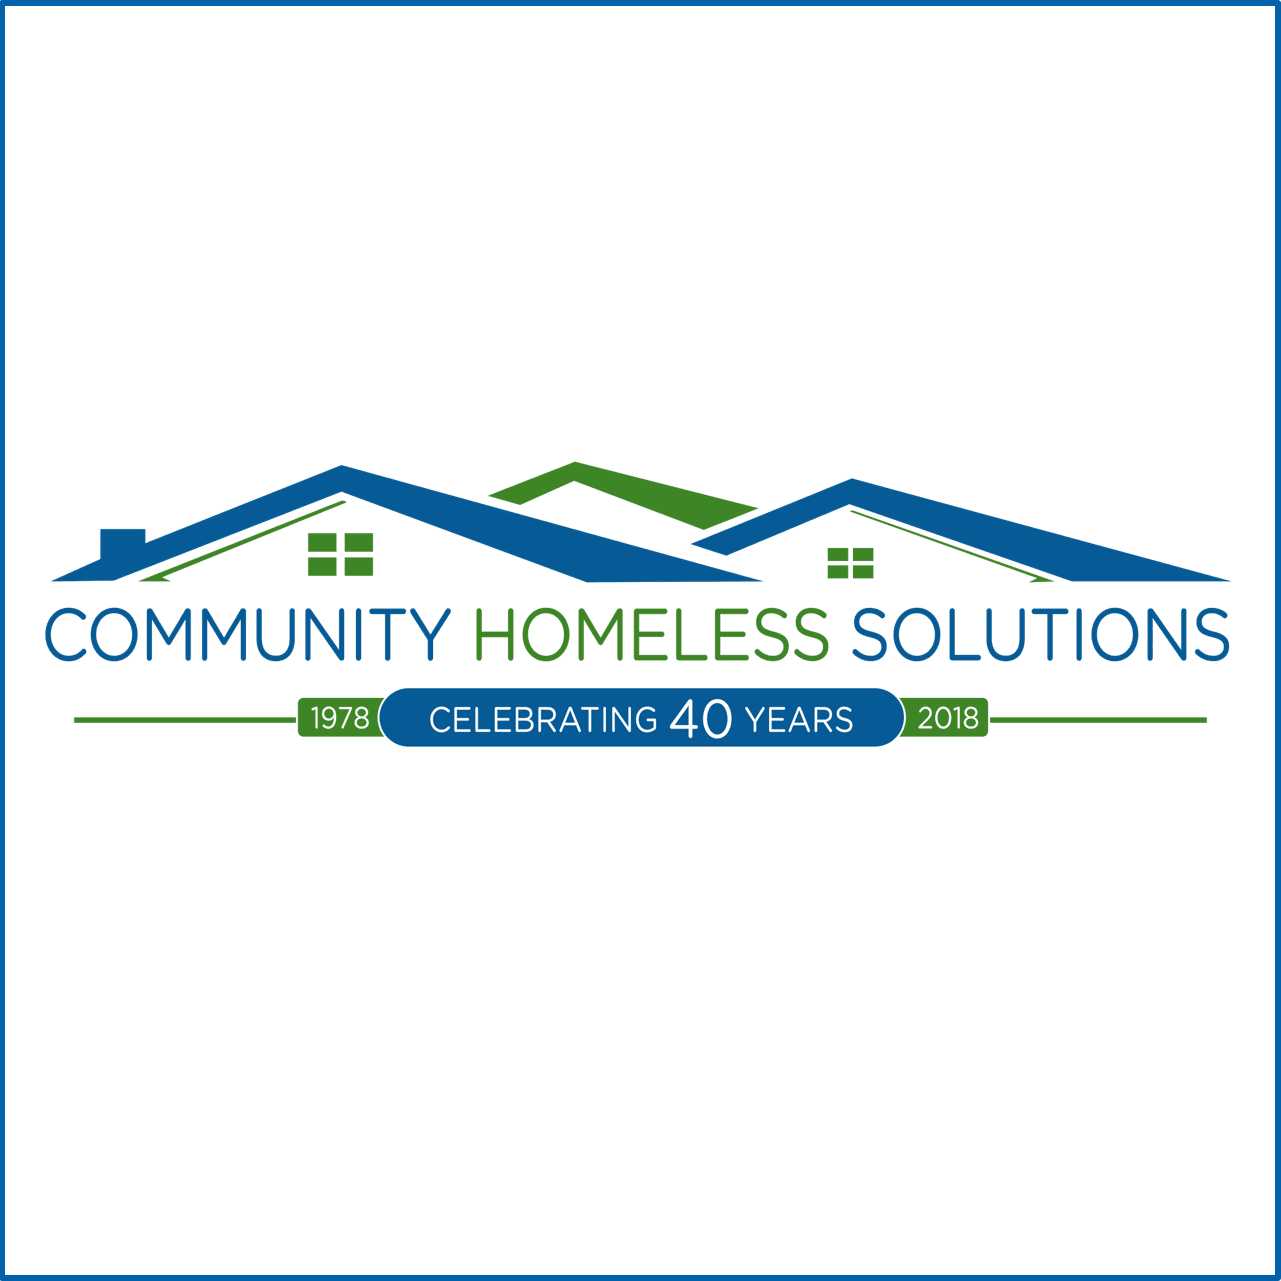 Transitional Housing and Shelter for Victim's Domestic Violence at Community Homeless Solutions